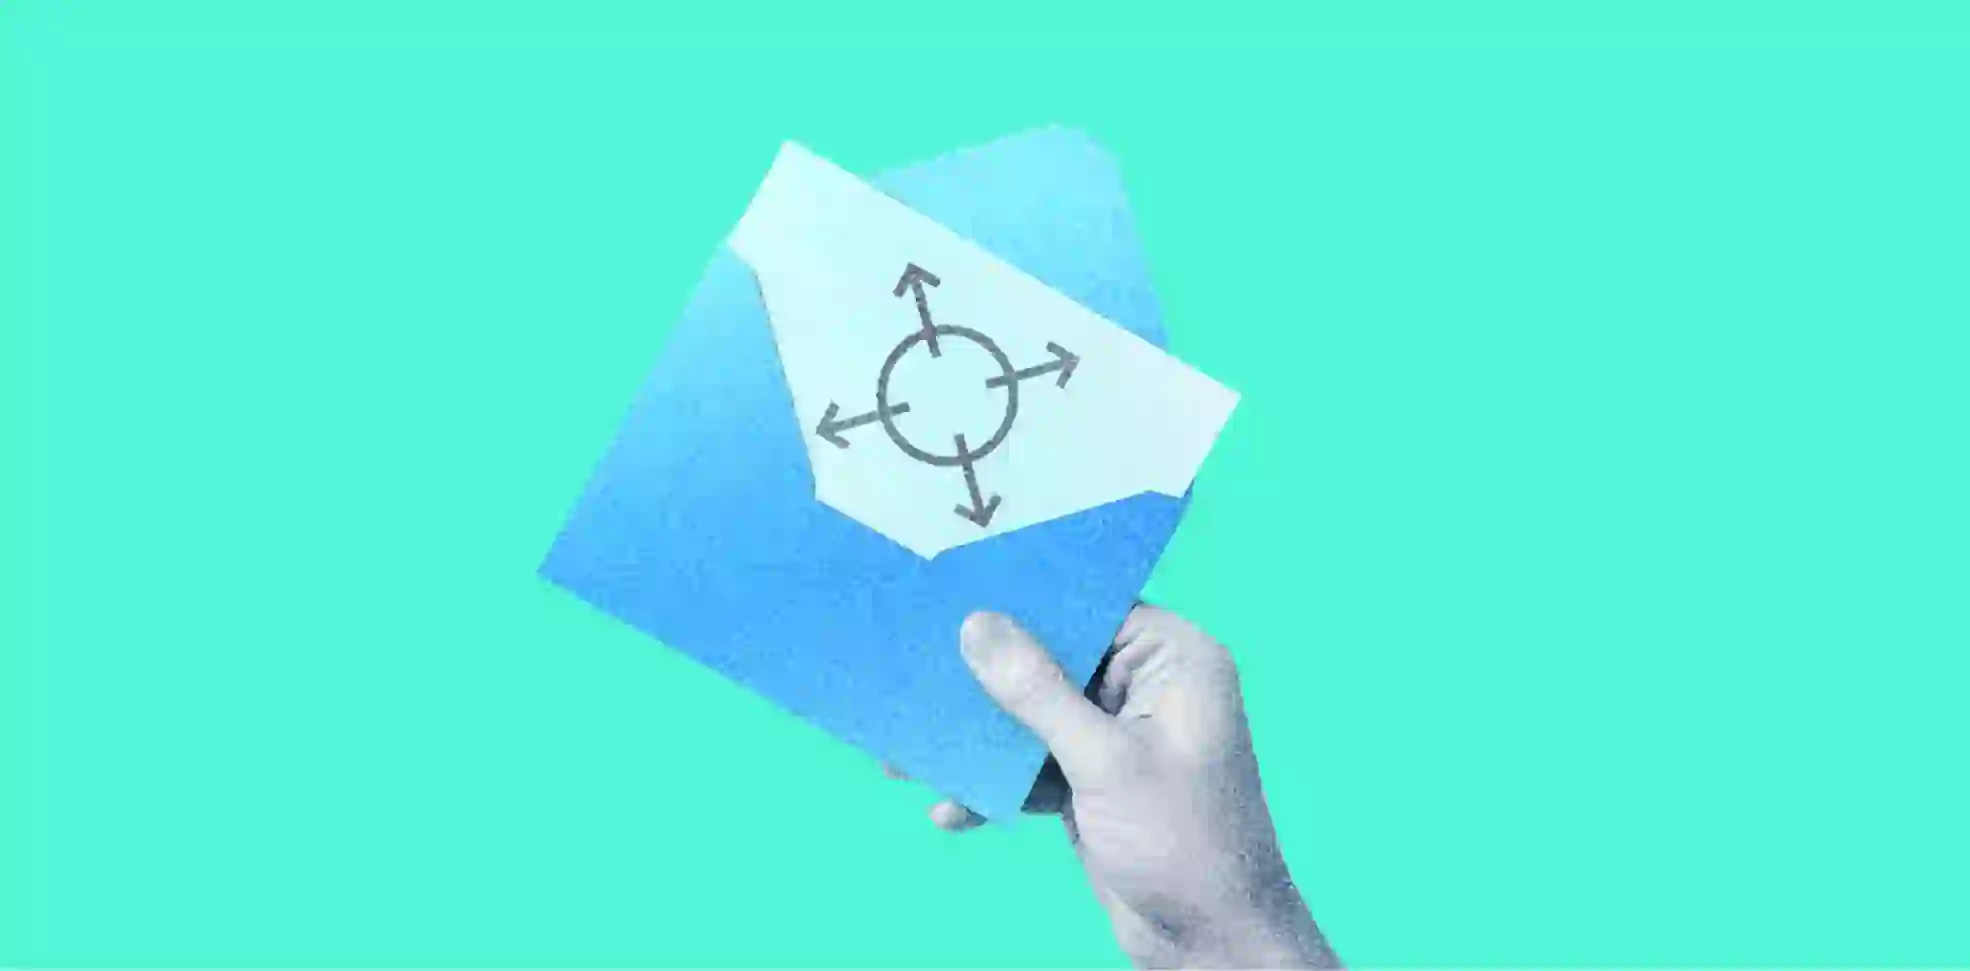 circle with arrows on a sheet in an envelope